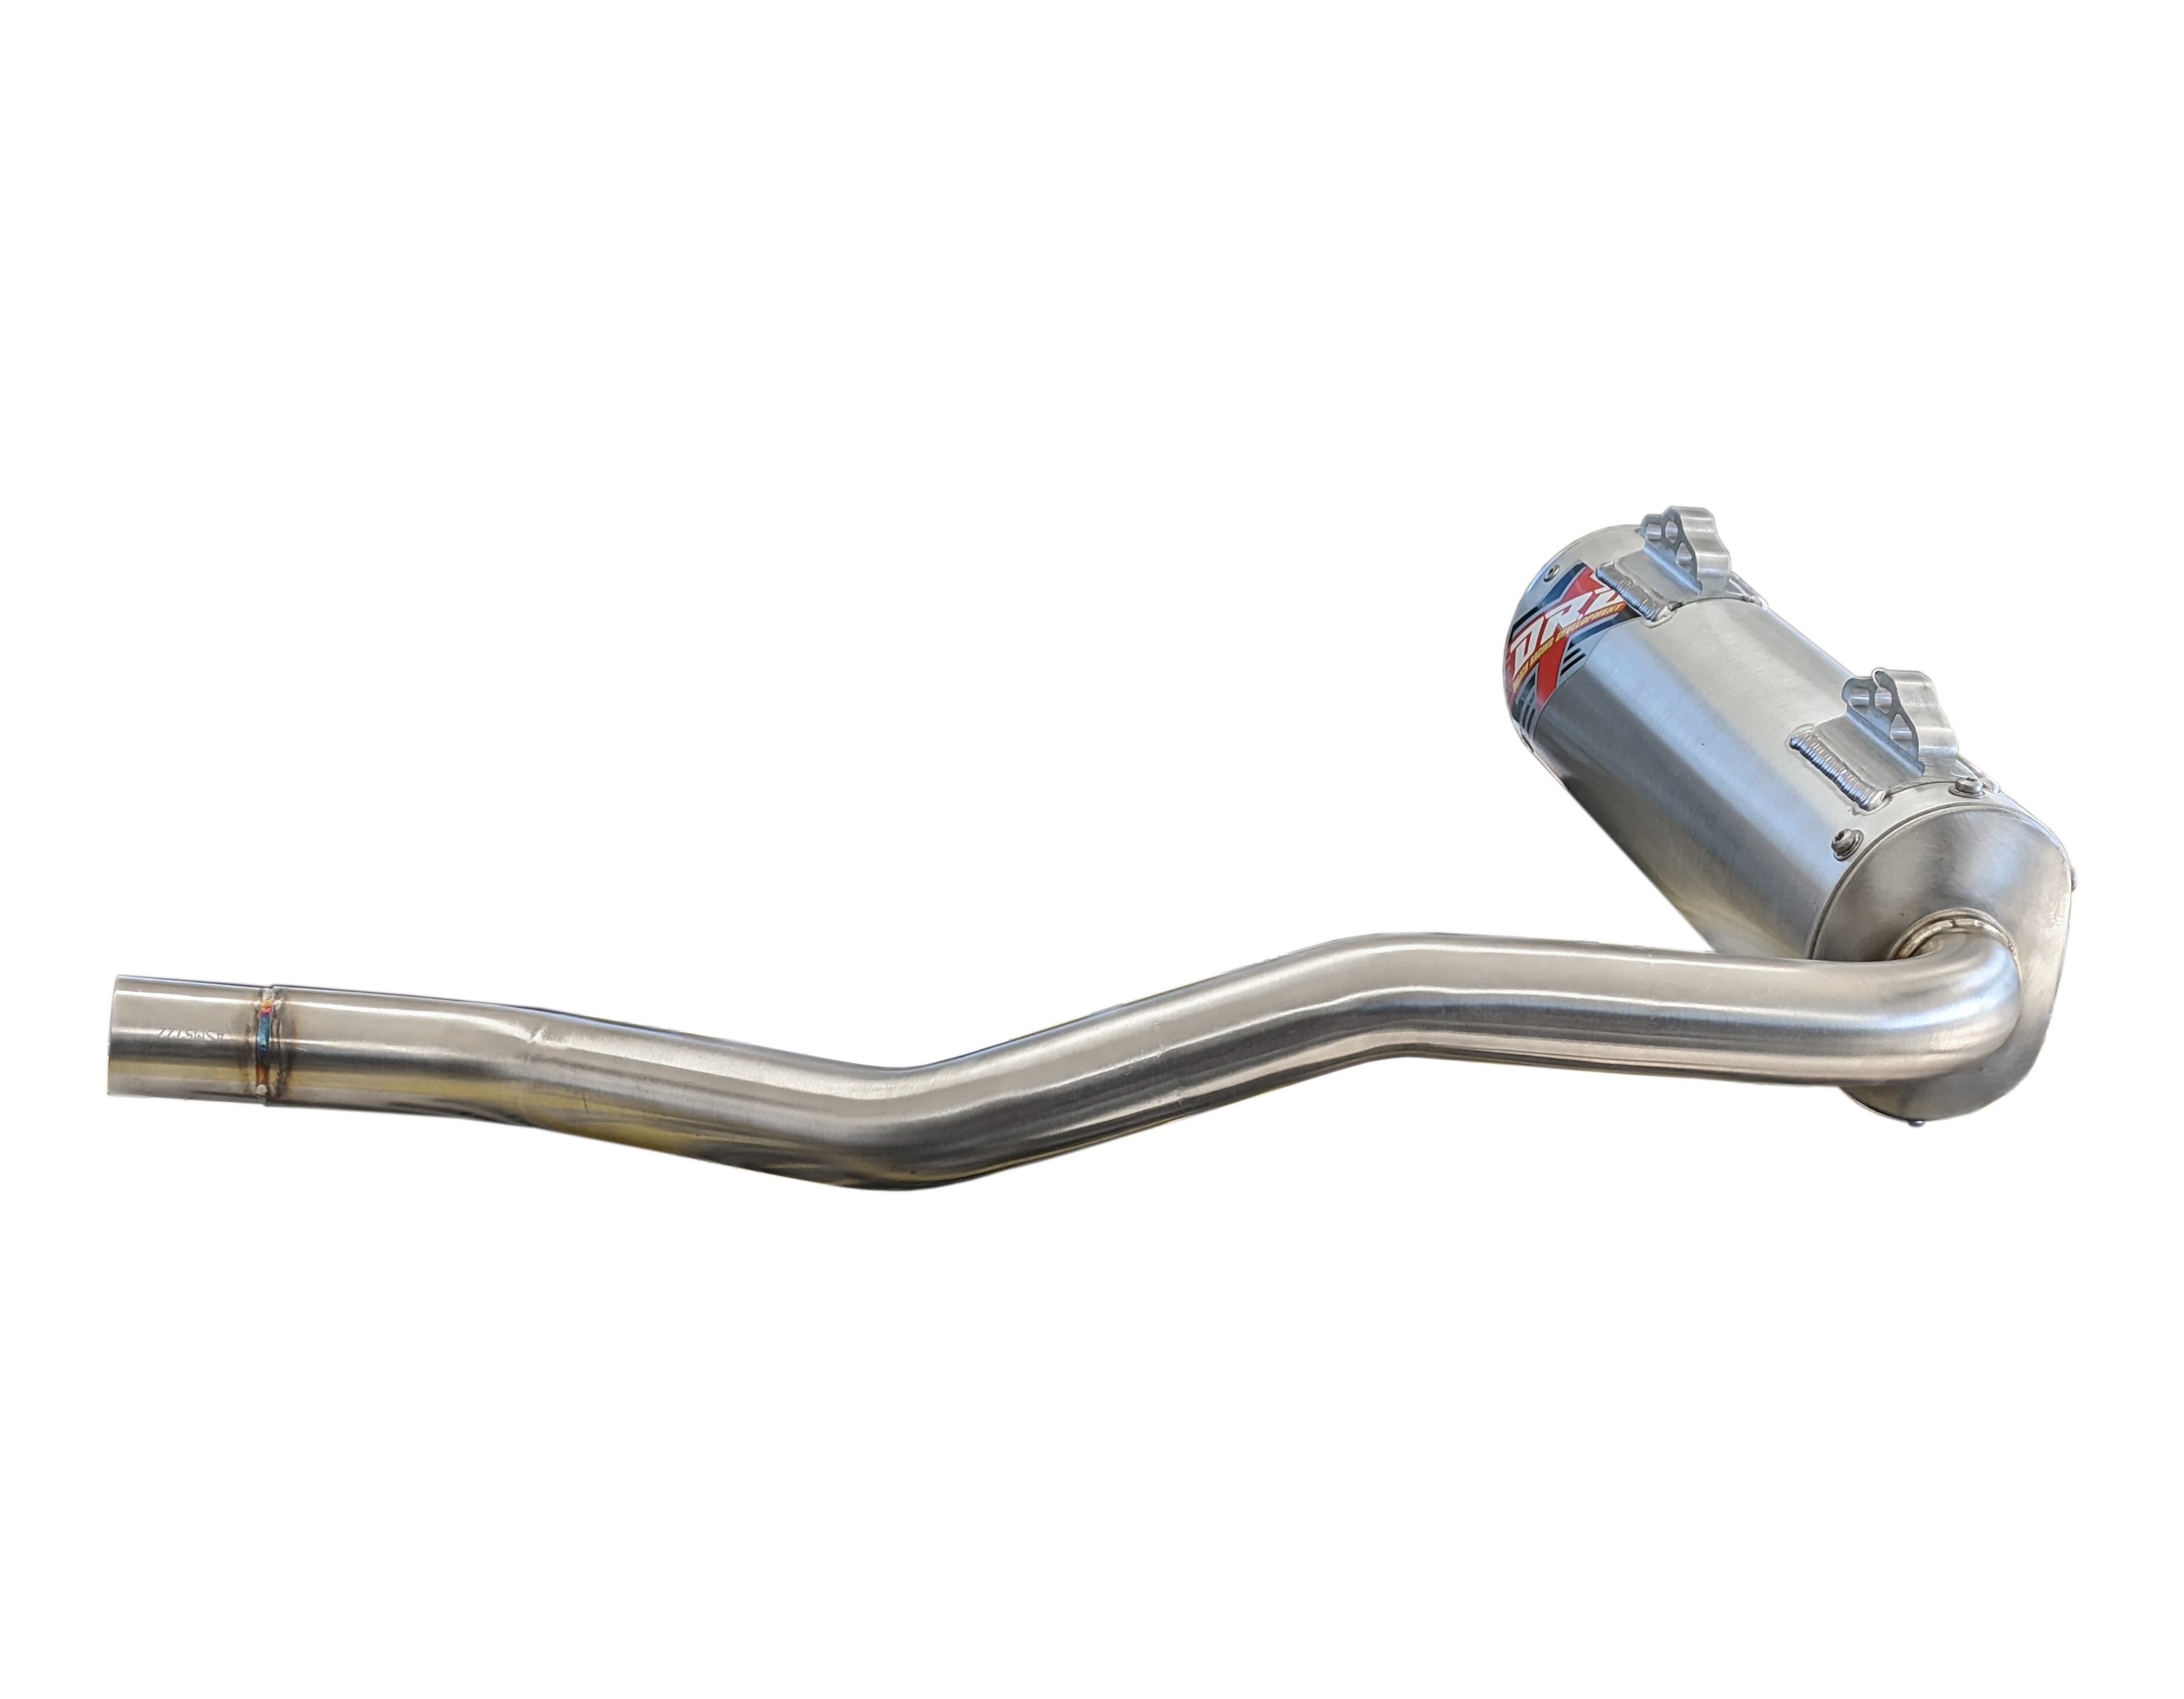 Stainless Steel & Aluminum Slip On Exhaust w/ Spark Arrestor - For 03-14 Honda Rincon 650 & 680 - Click Image to Close